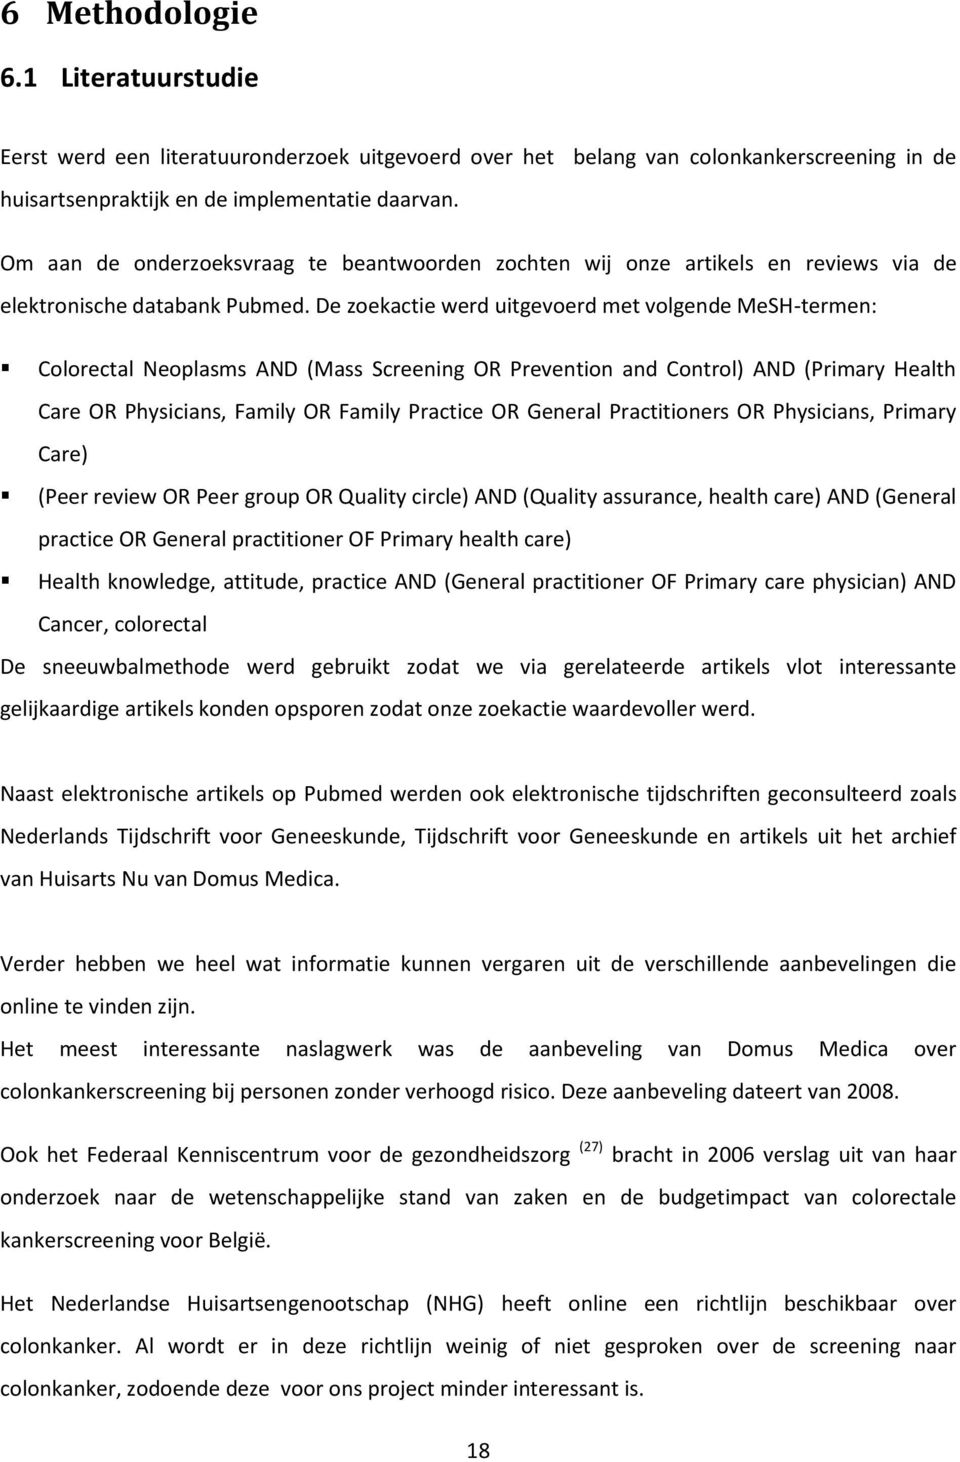 De zoekactie werd uitgevoerd met volgende MeSH-termen: Colorectal Neoplasms AND (Mass Screening OR Prevention and Control) AND (Primary Health Care OR Physicians, Family OR Family Practice OR General